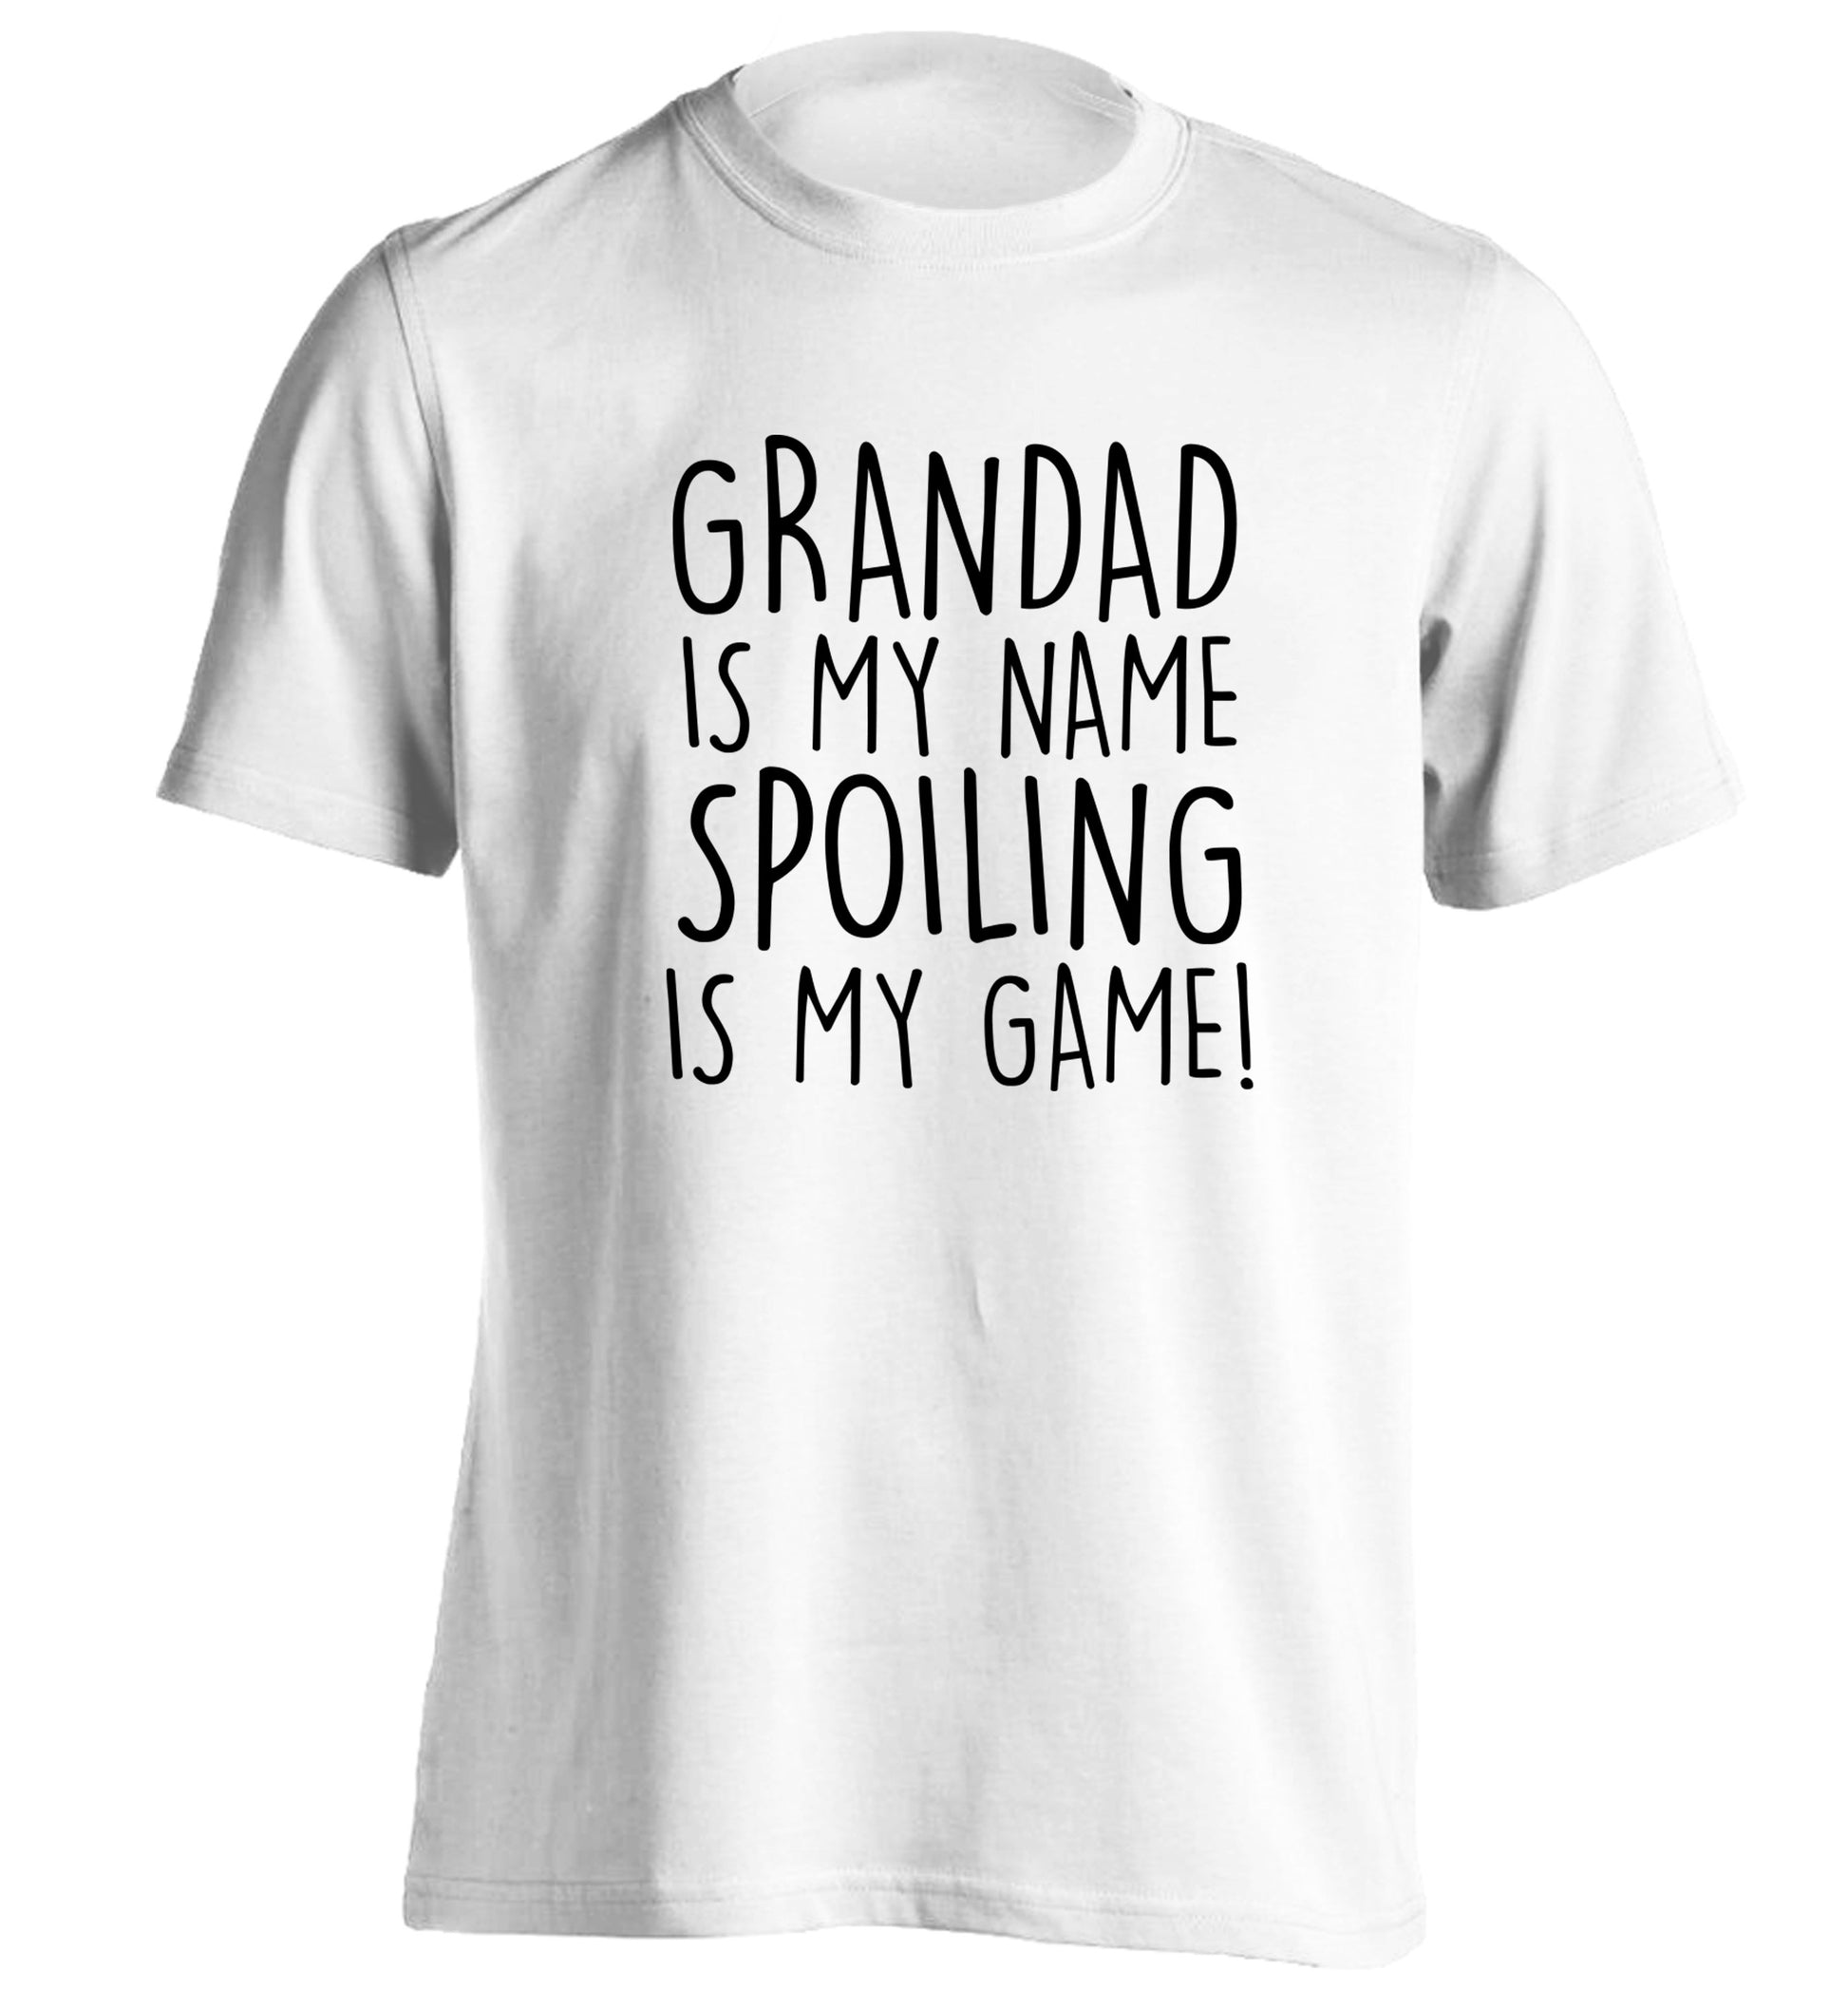 Grandad is my name, spoiling is my game adults unisex white Tshirt 2XL